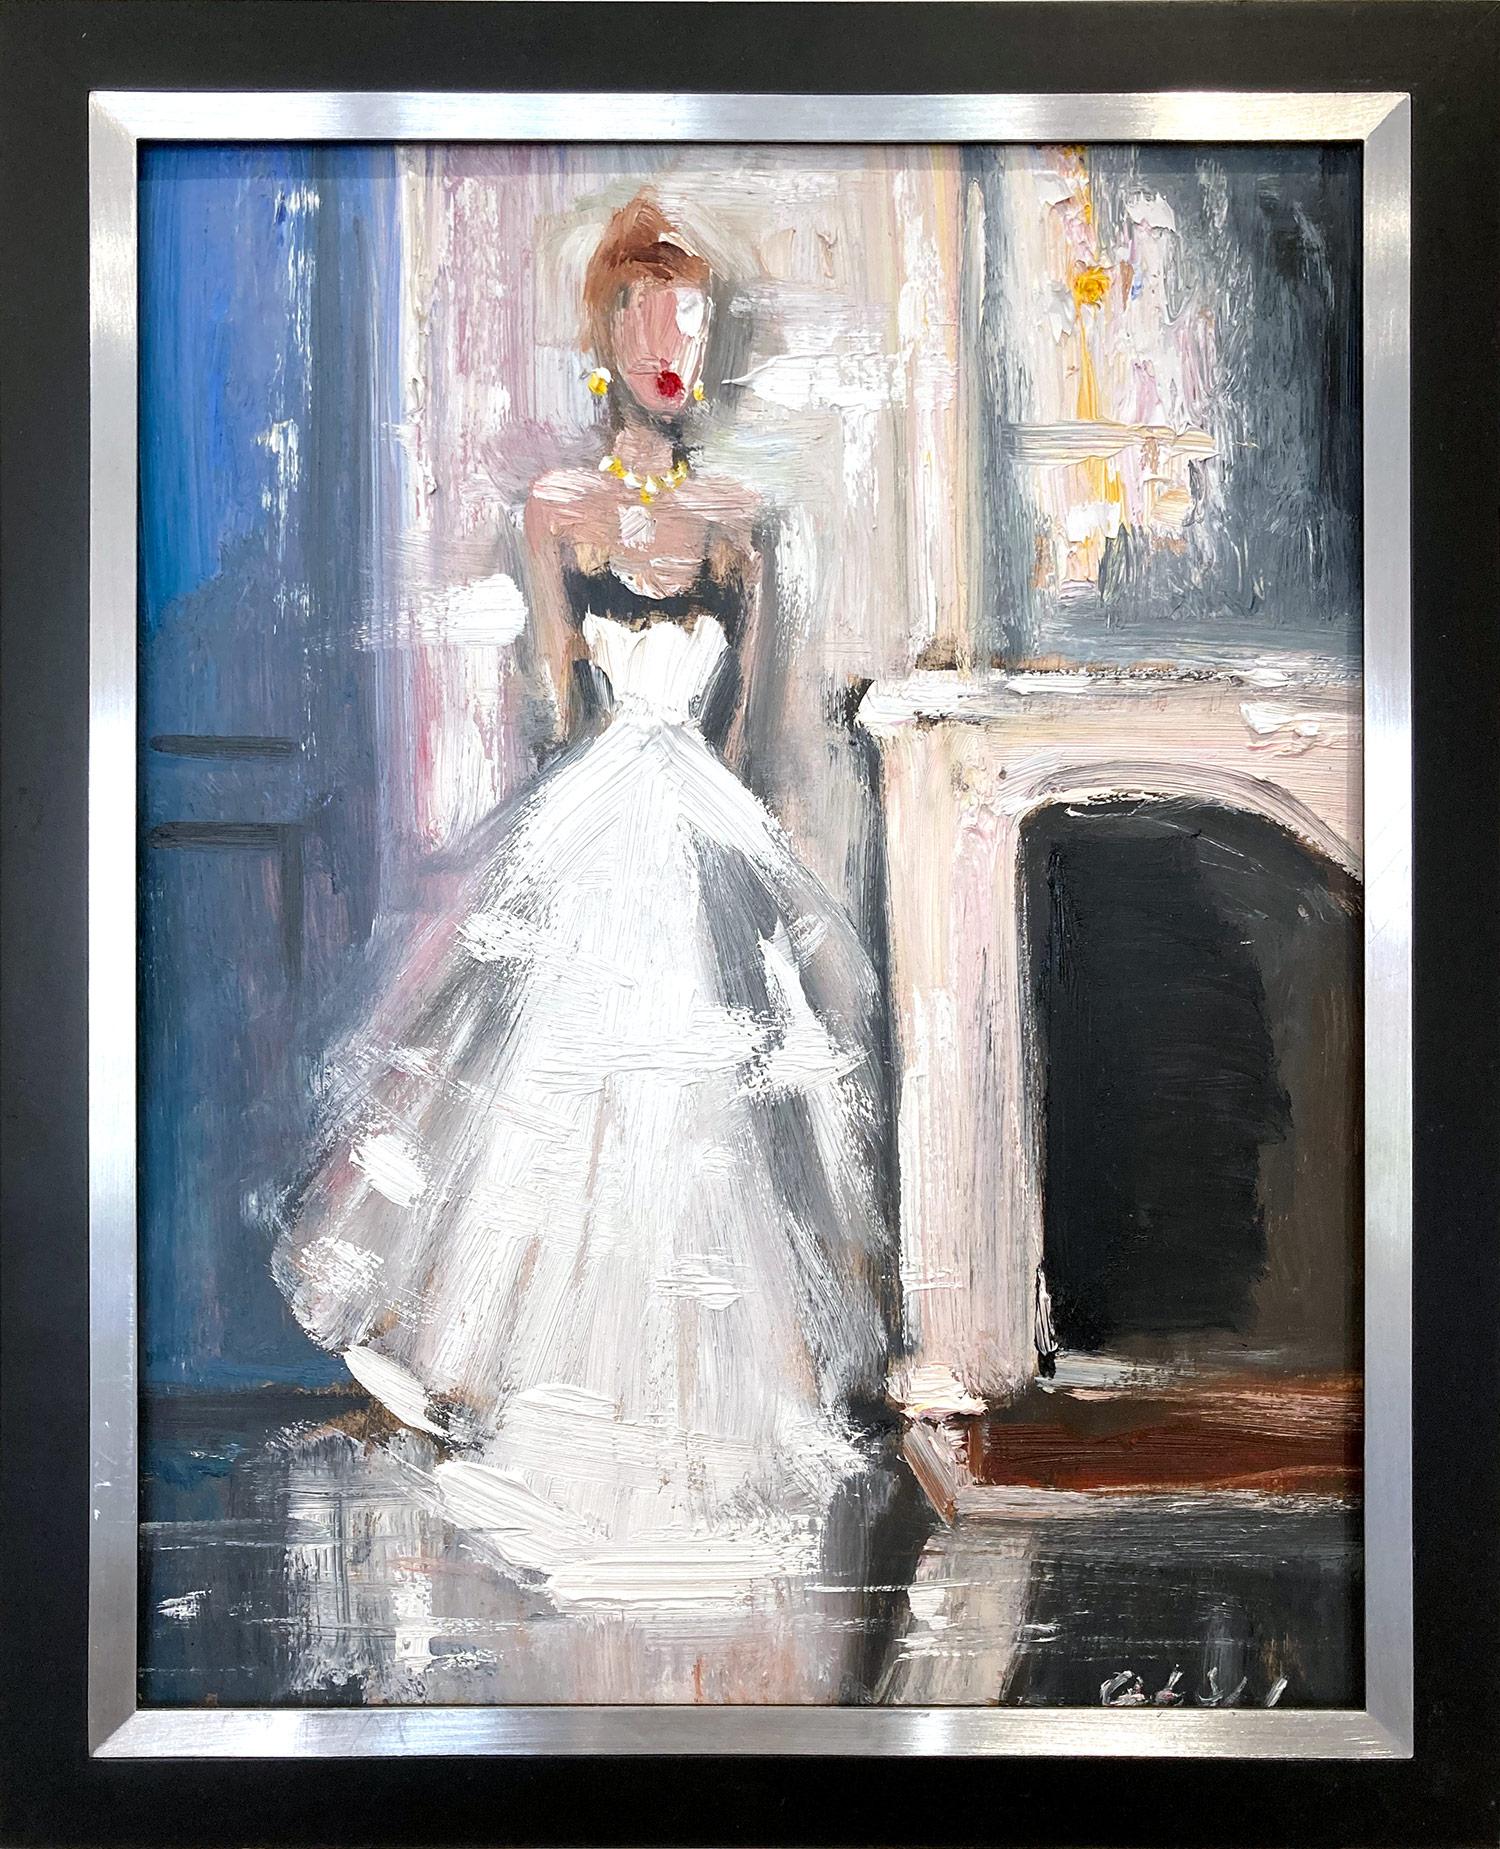 Cindy Shaoul Figurative Painting - "As She Glimmers" Interior Haute Couture in Chanel Impressionistic Oil Painting